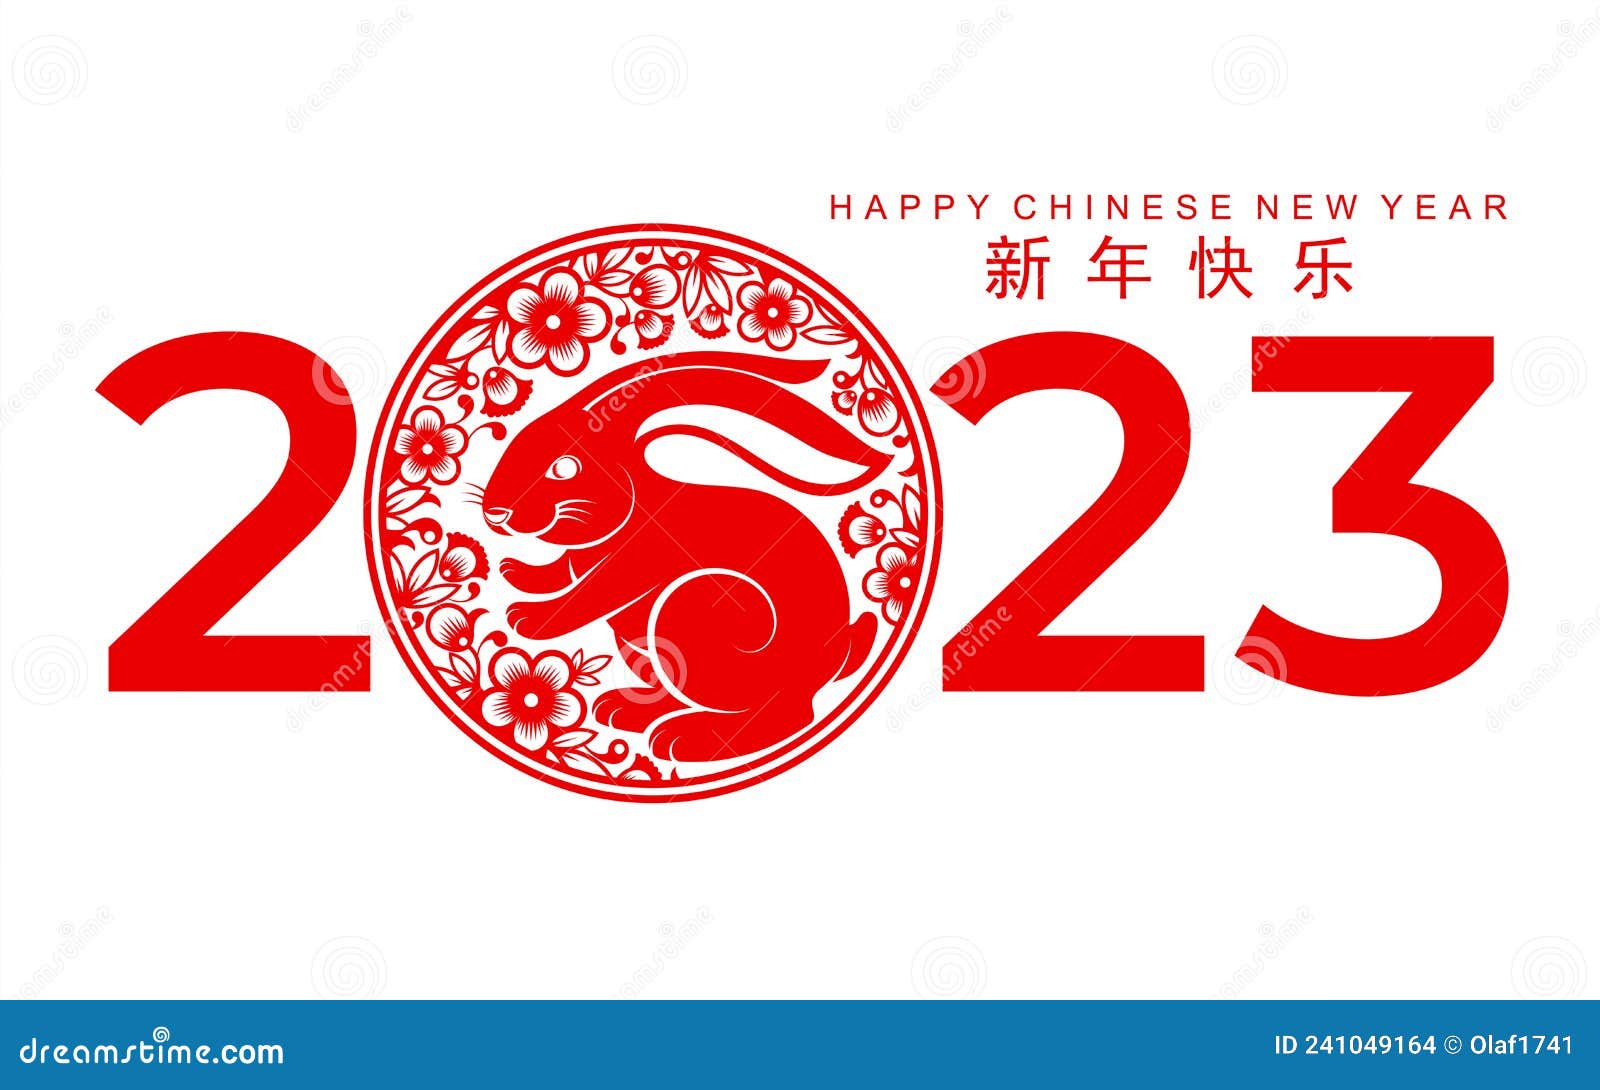 Happy Chinese New Year 2023 Year Of The Rabbit Zodiac Sign, Gong Xi Fa Cai  With Flower,lantern,asian Elements Gold Paper Cut Style On Color  Background. (Translation : Happy New Year) Royalty Free